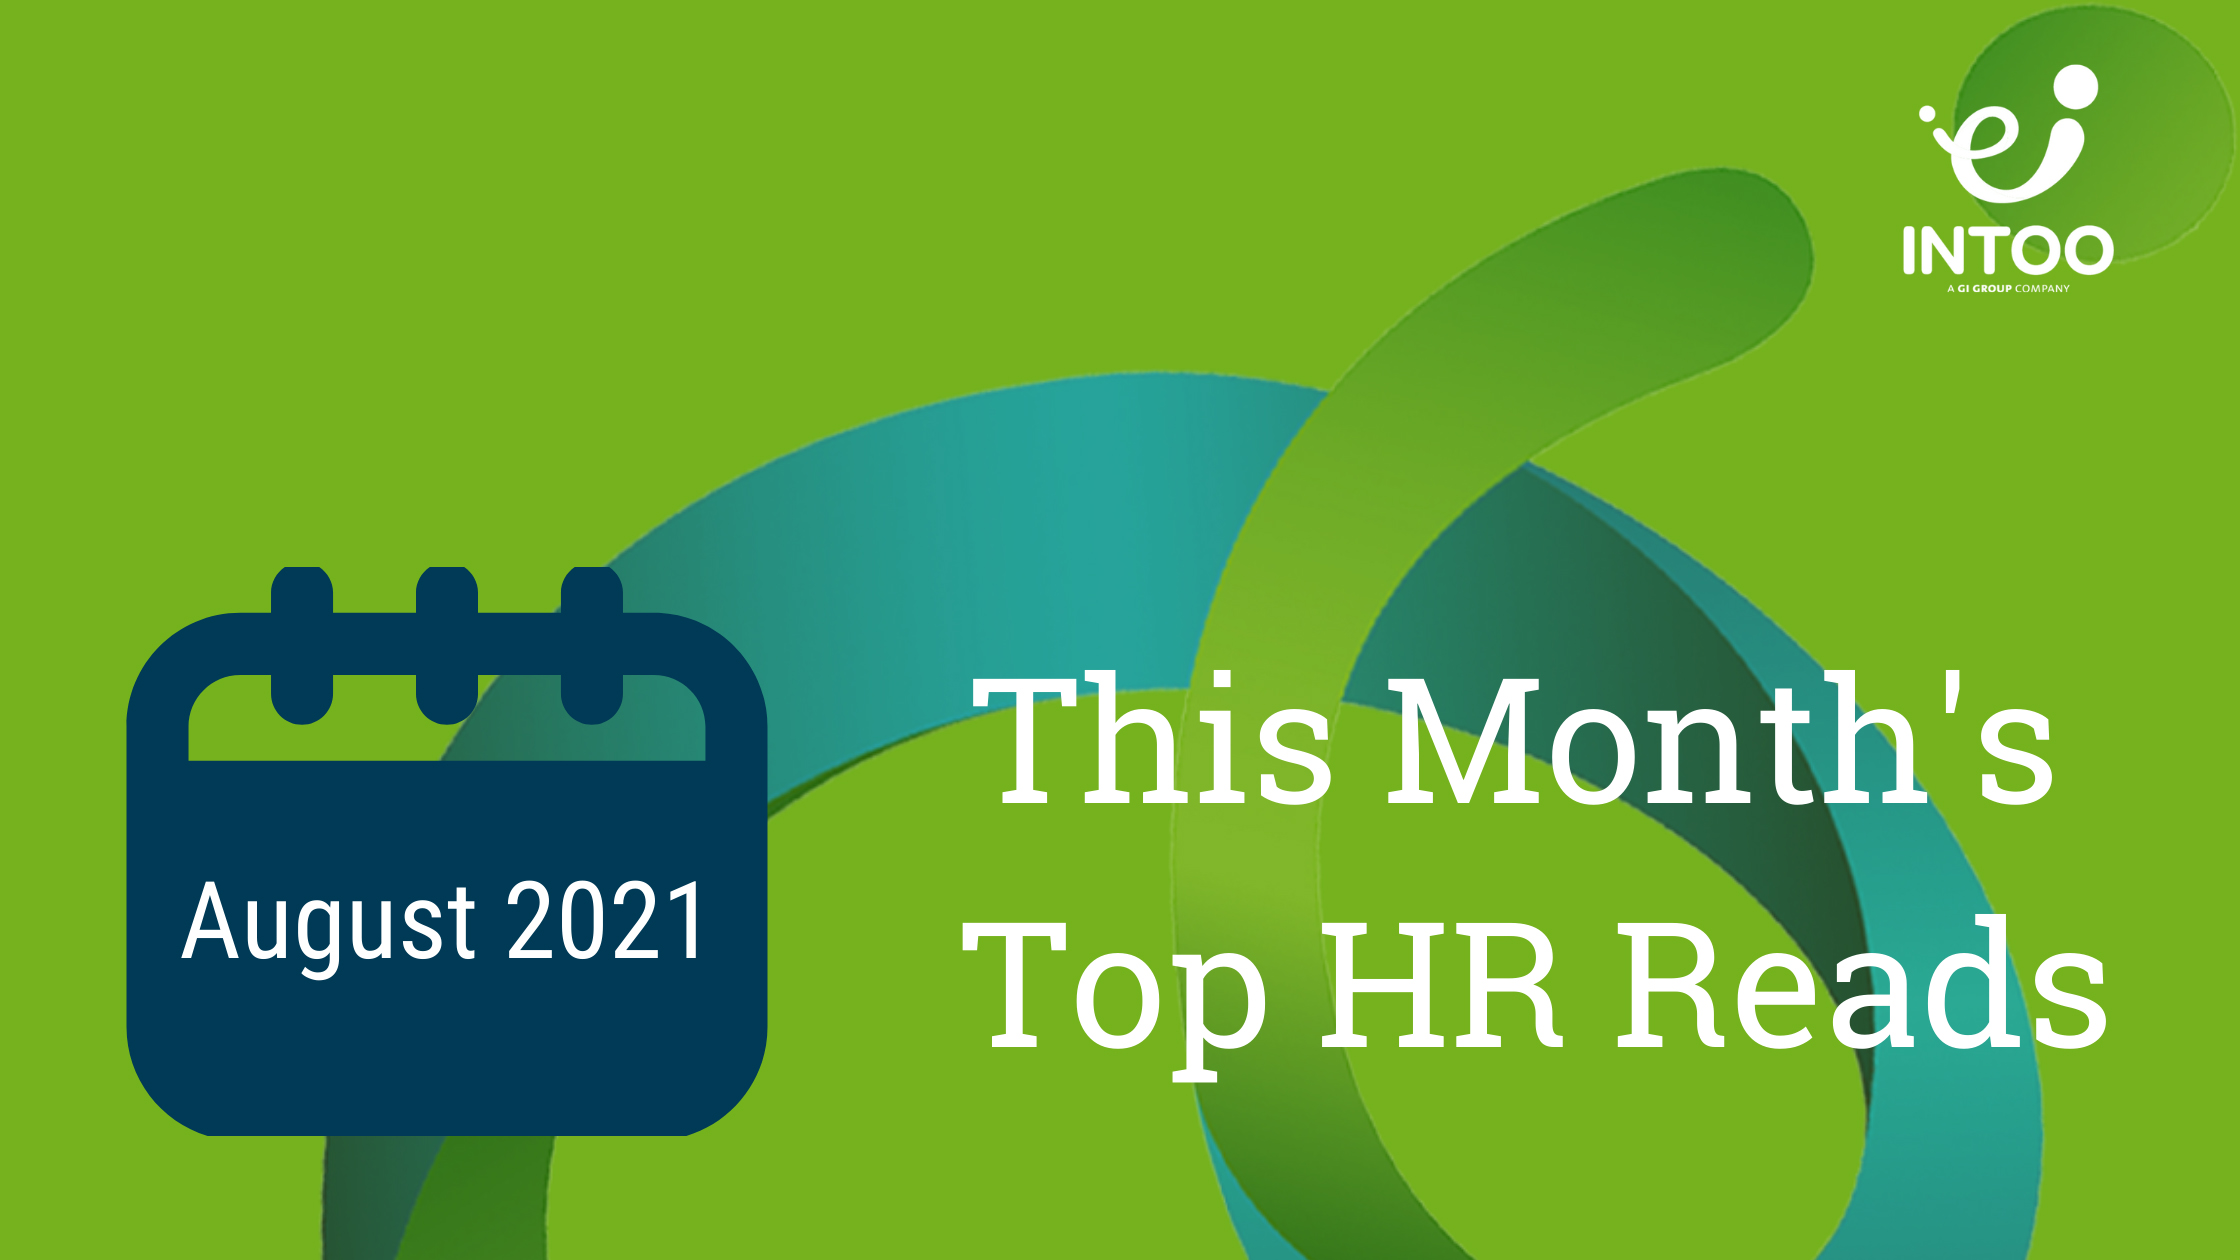 August 2021 - This Month's Top HR Reads